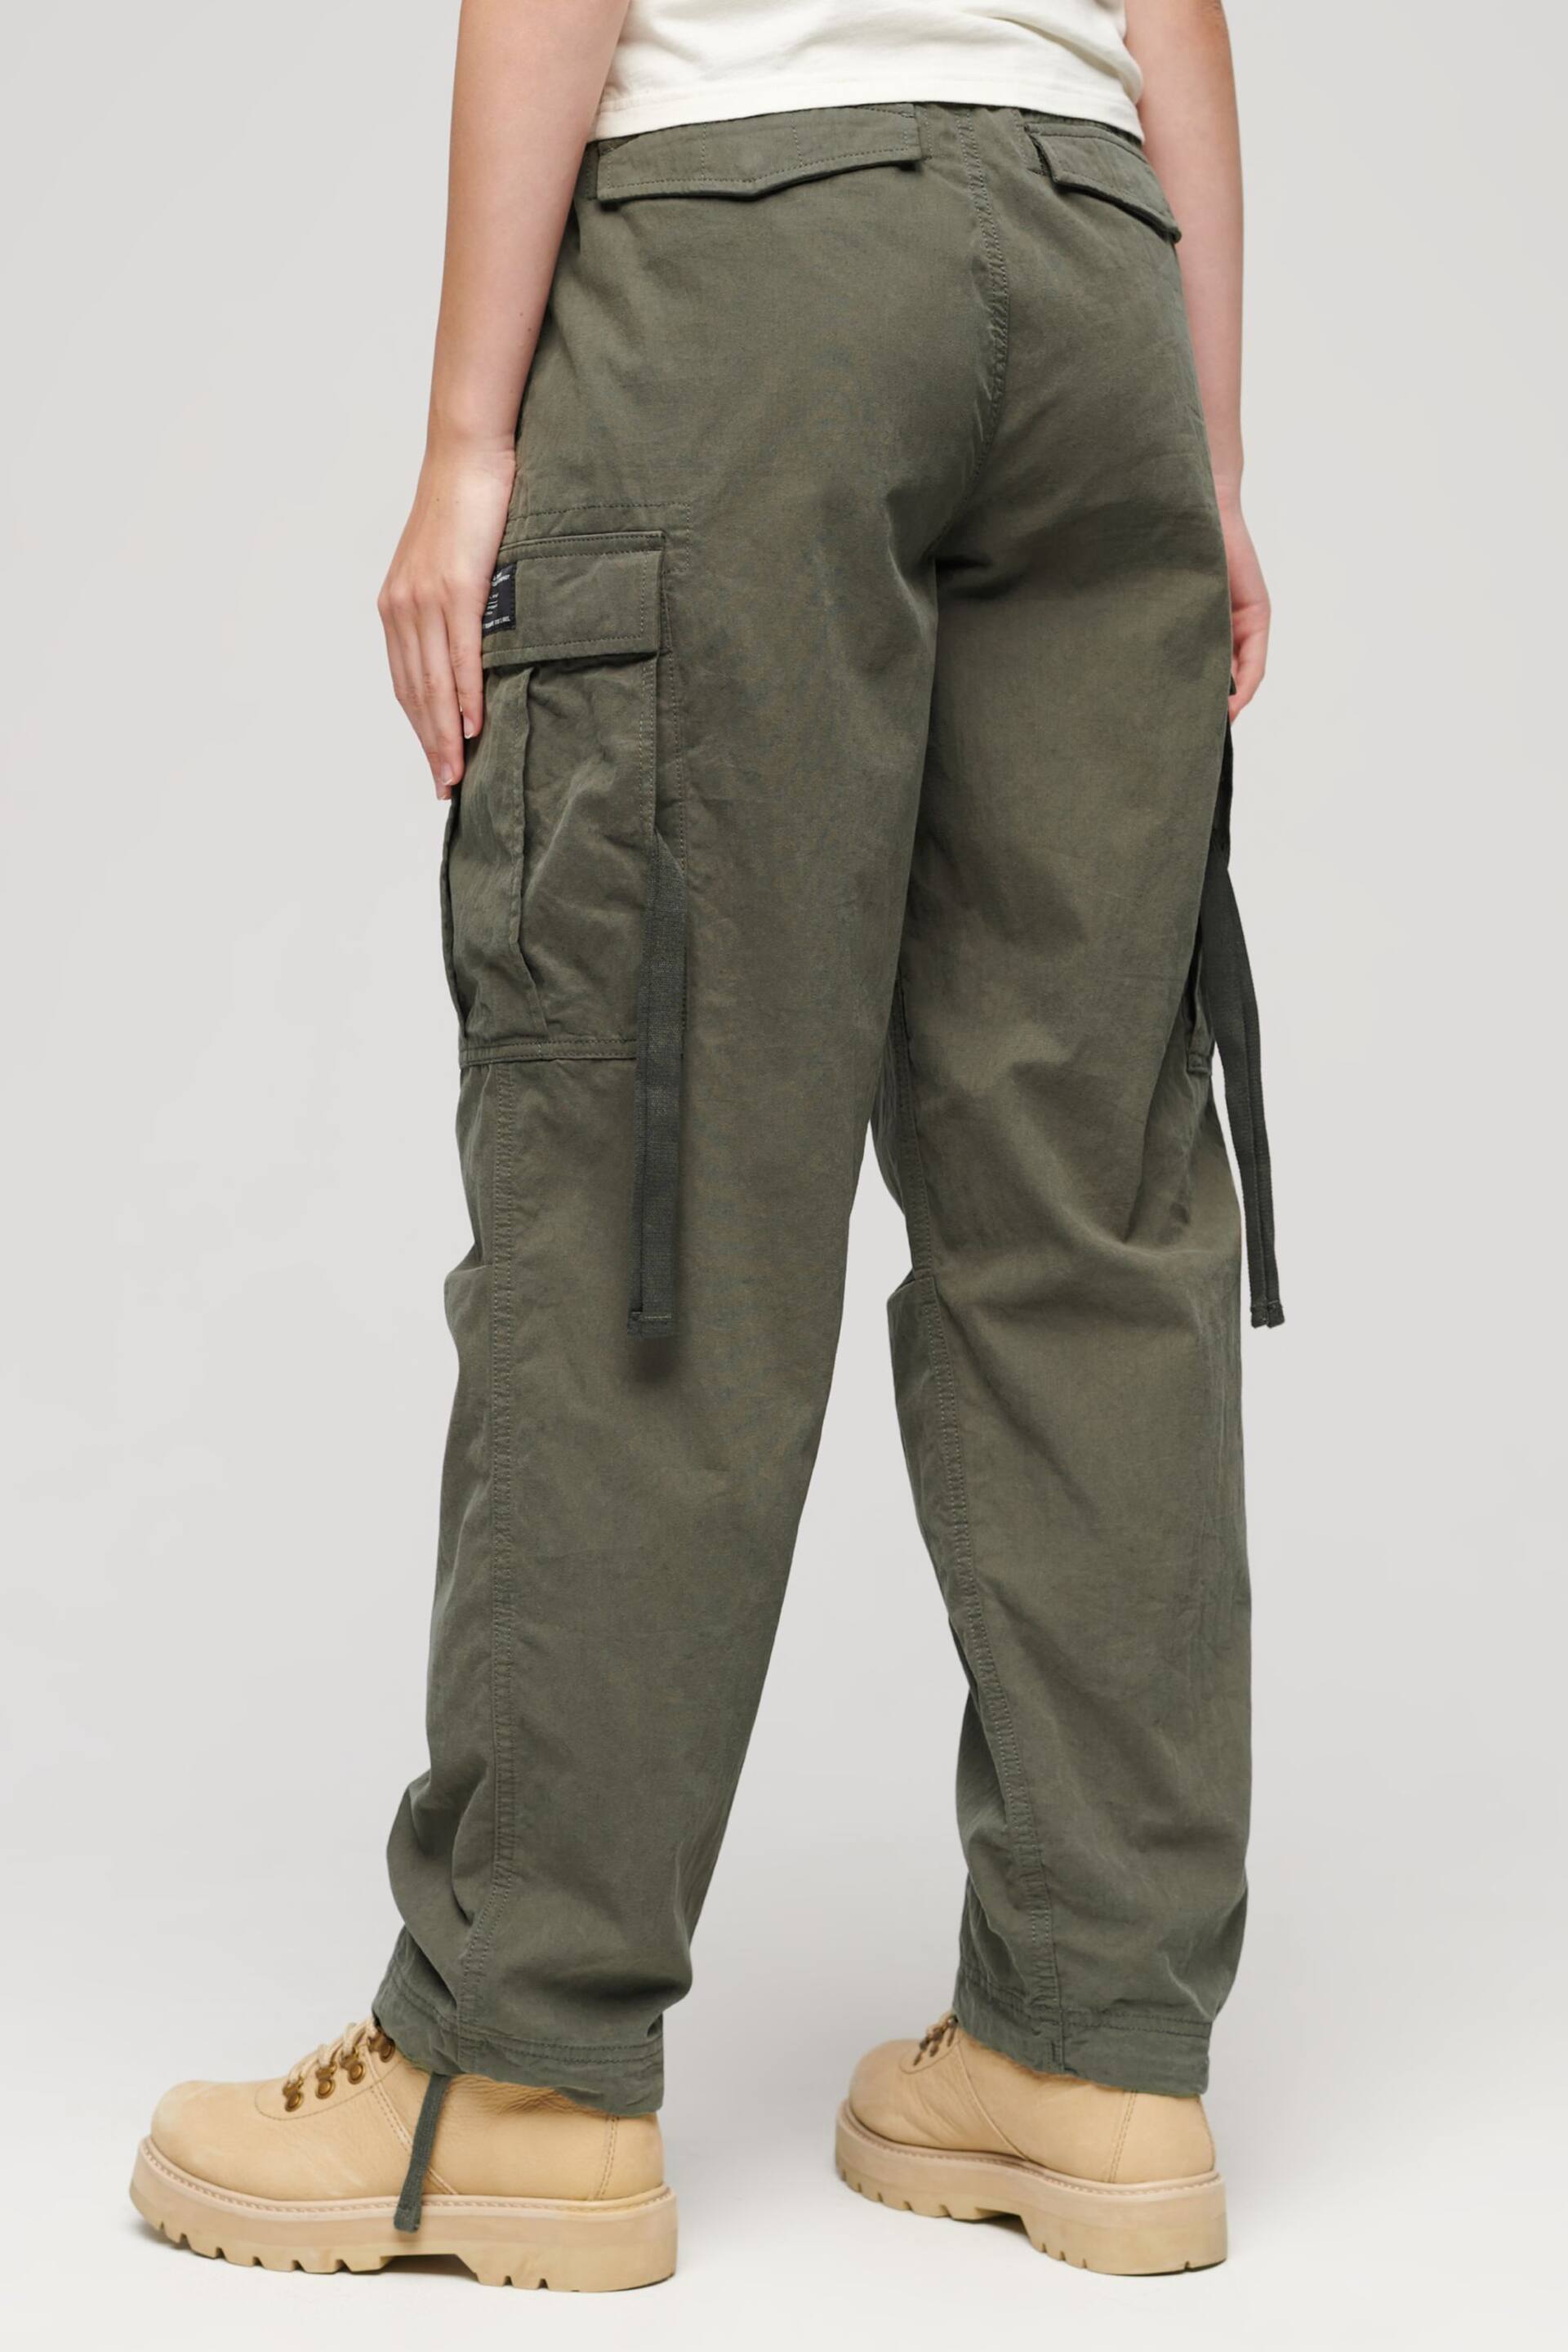 Superdry Green Parachute Grip Trousers - Image 2 of 3